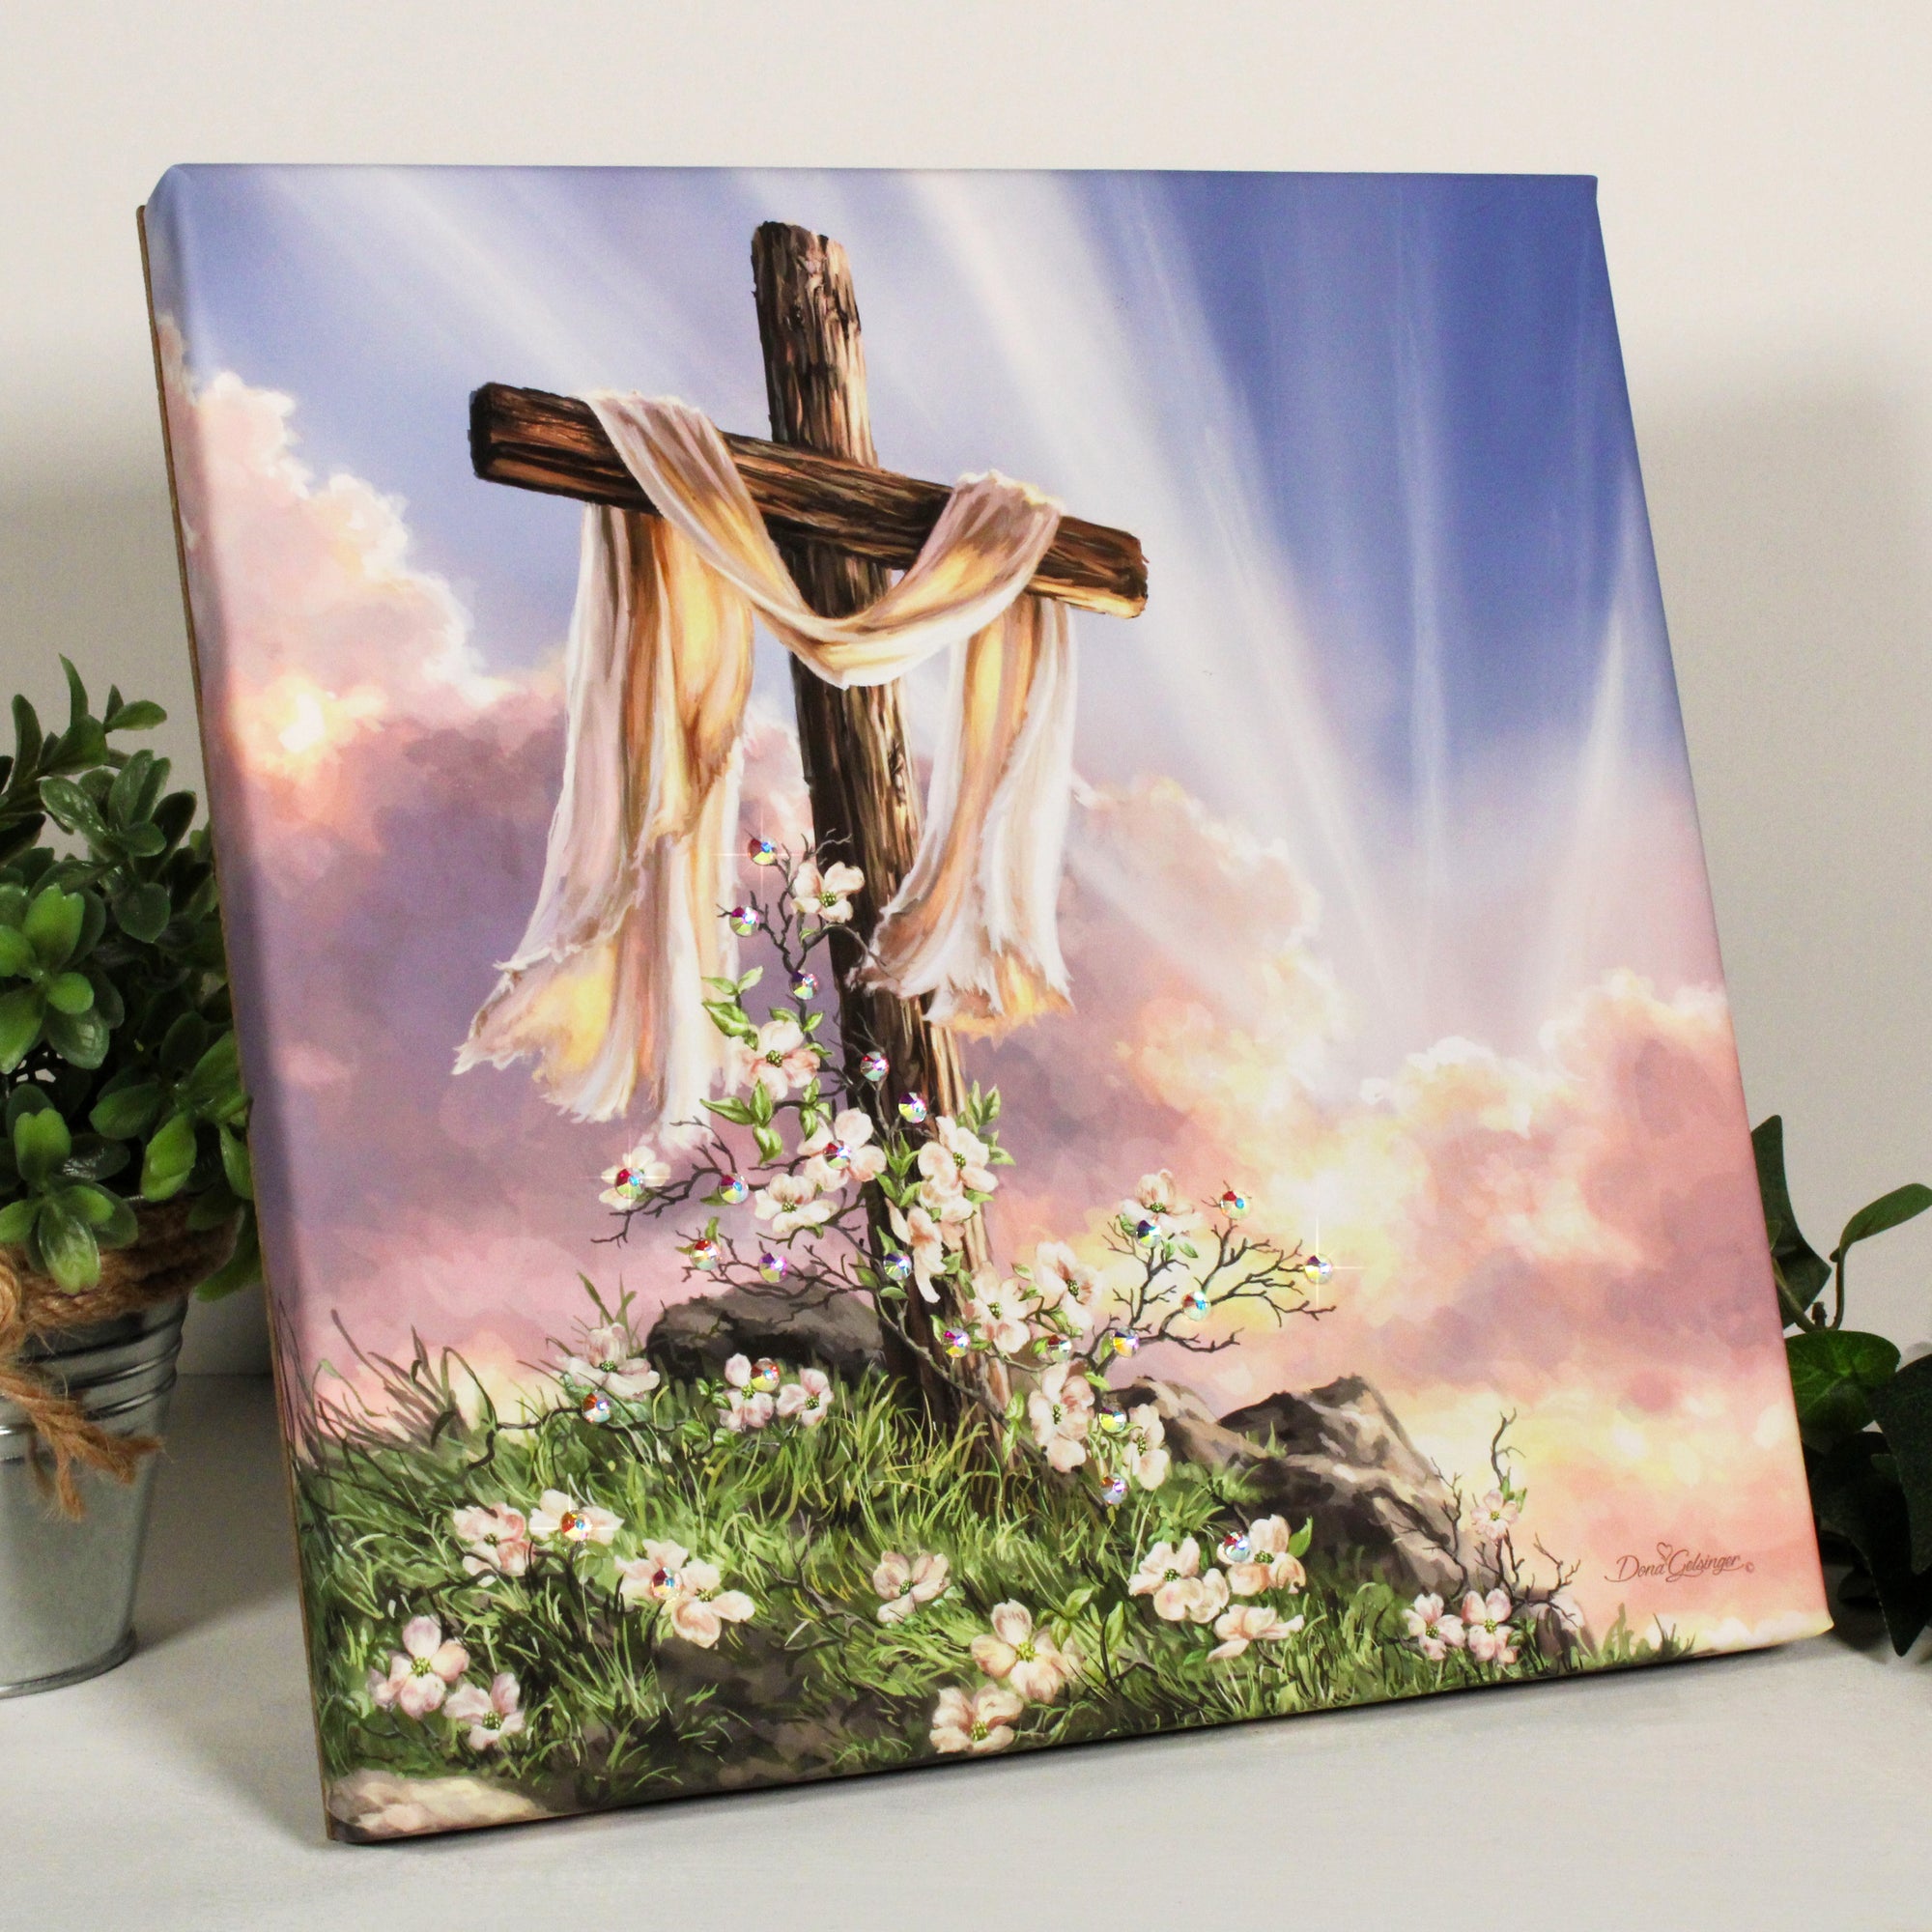 This stunning piece of art captures the essence of the resurrection with a beautiful cross perched atop a hill, draped in cloth, and adorned with white flowers. As the sun's rays gently stream through the scene, the message "he is risen" is boldly emblazoned on the canvas.